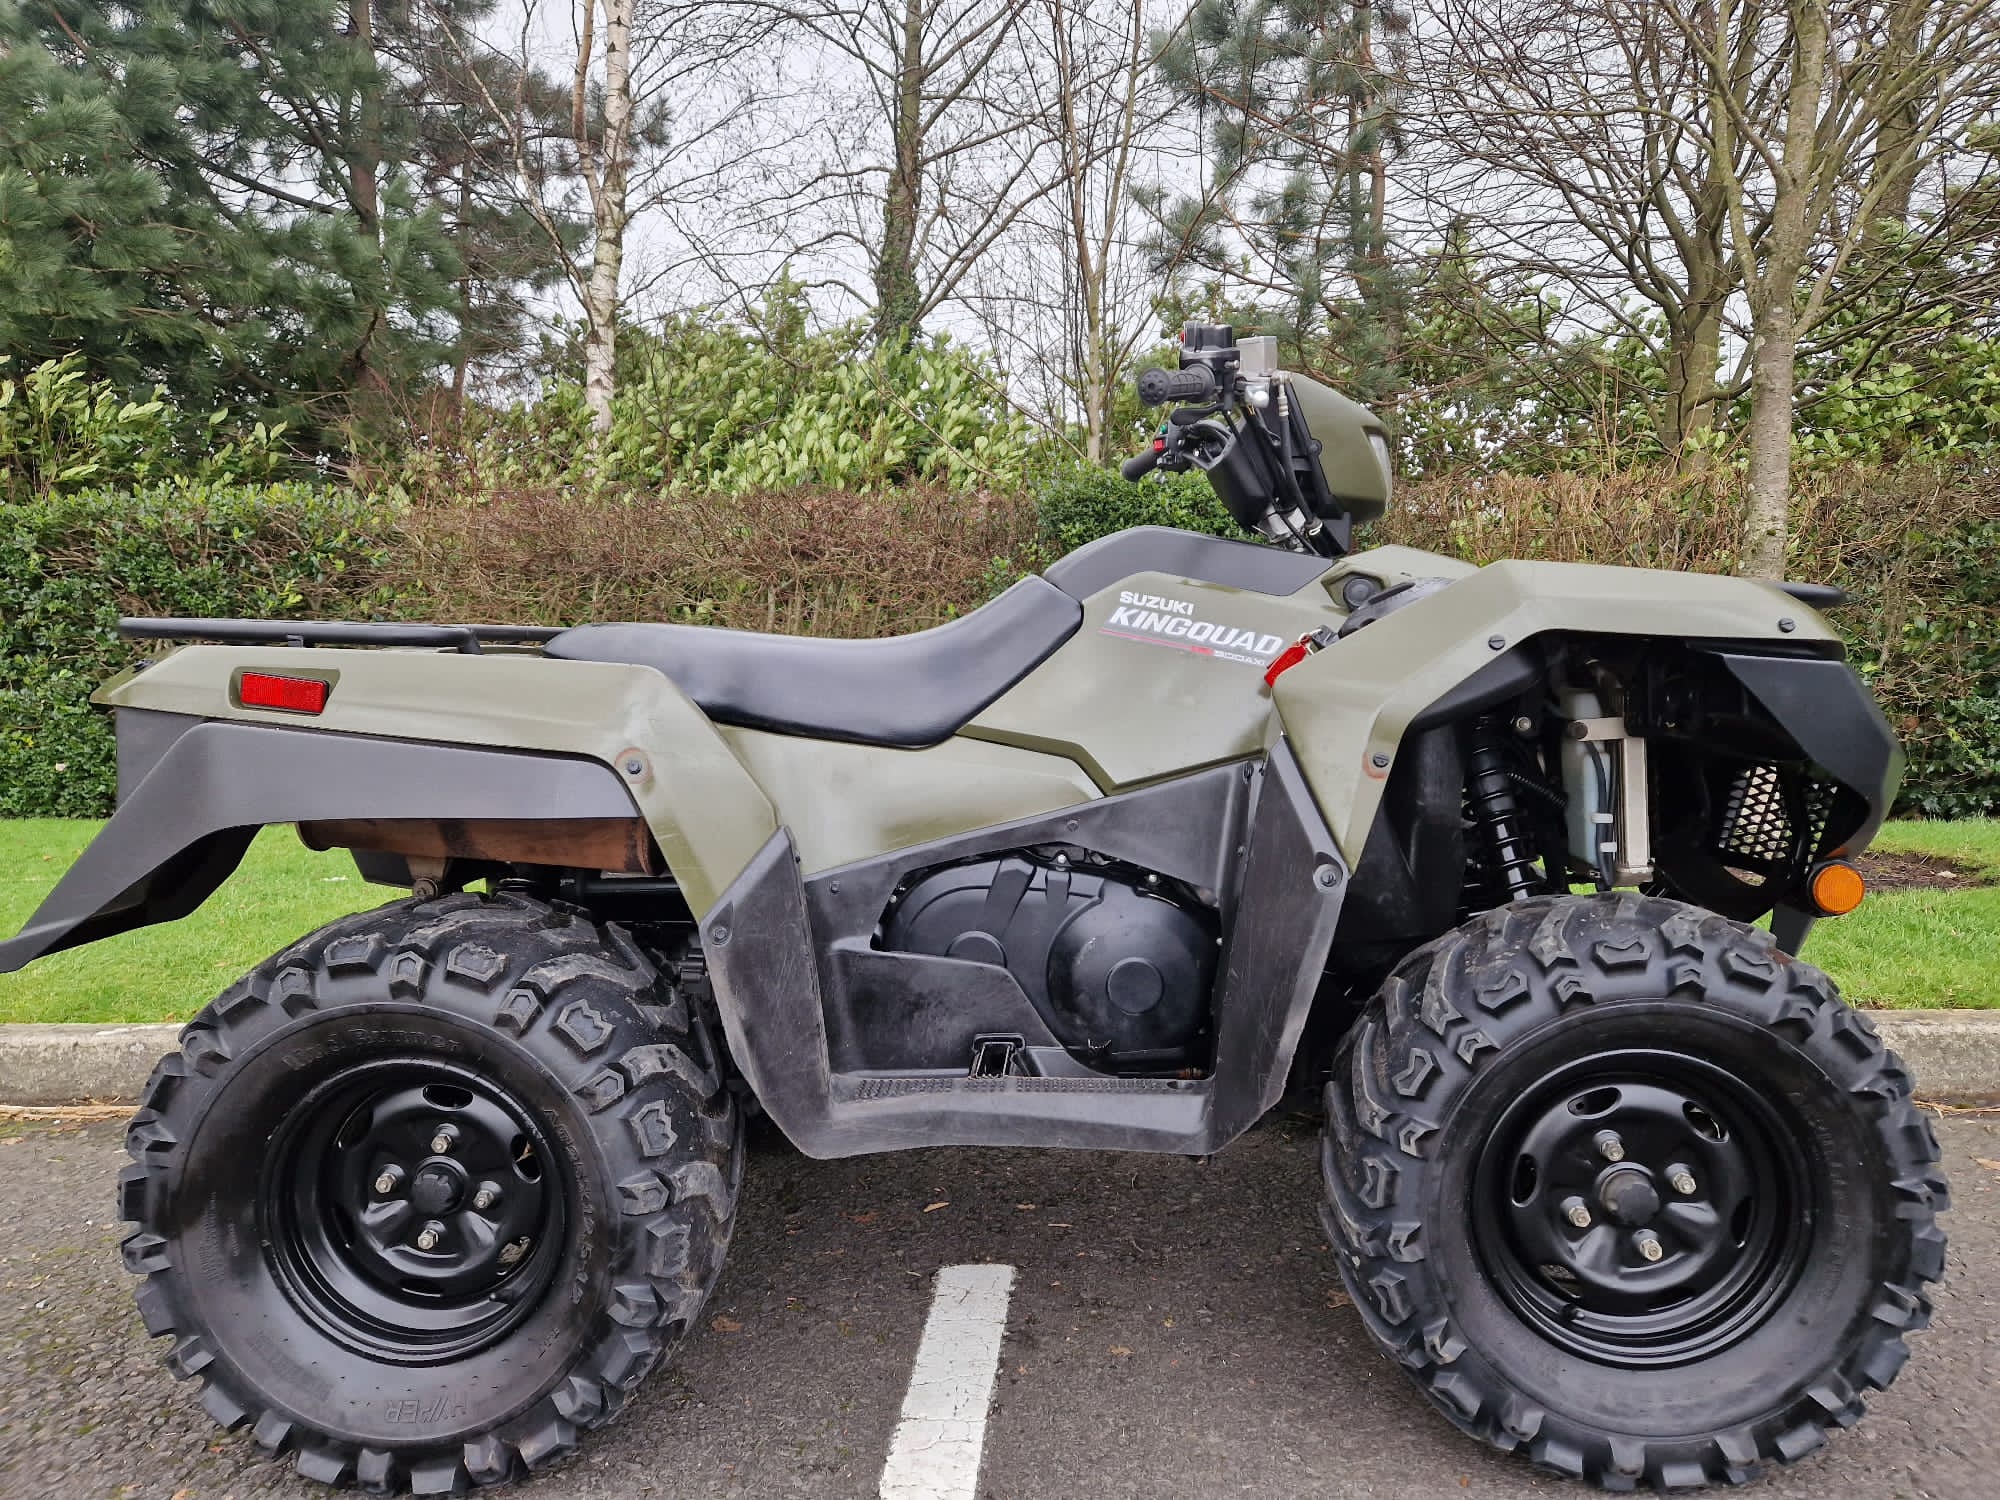 ***SOLD*** Suzuki LT-A500XP KingQuad - 2019 - Power Steering - Automatic - Fully Serviced